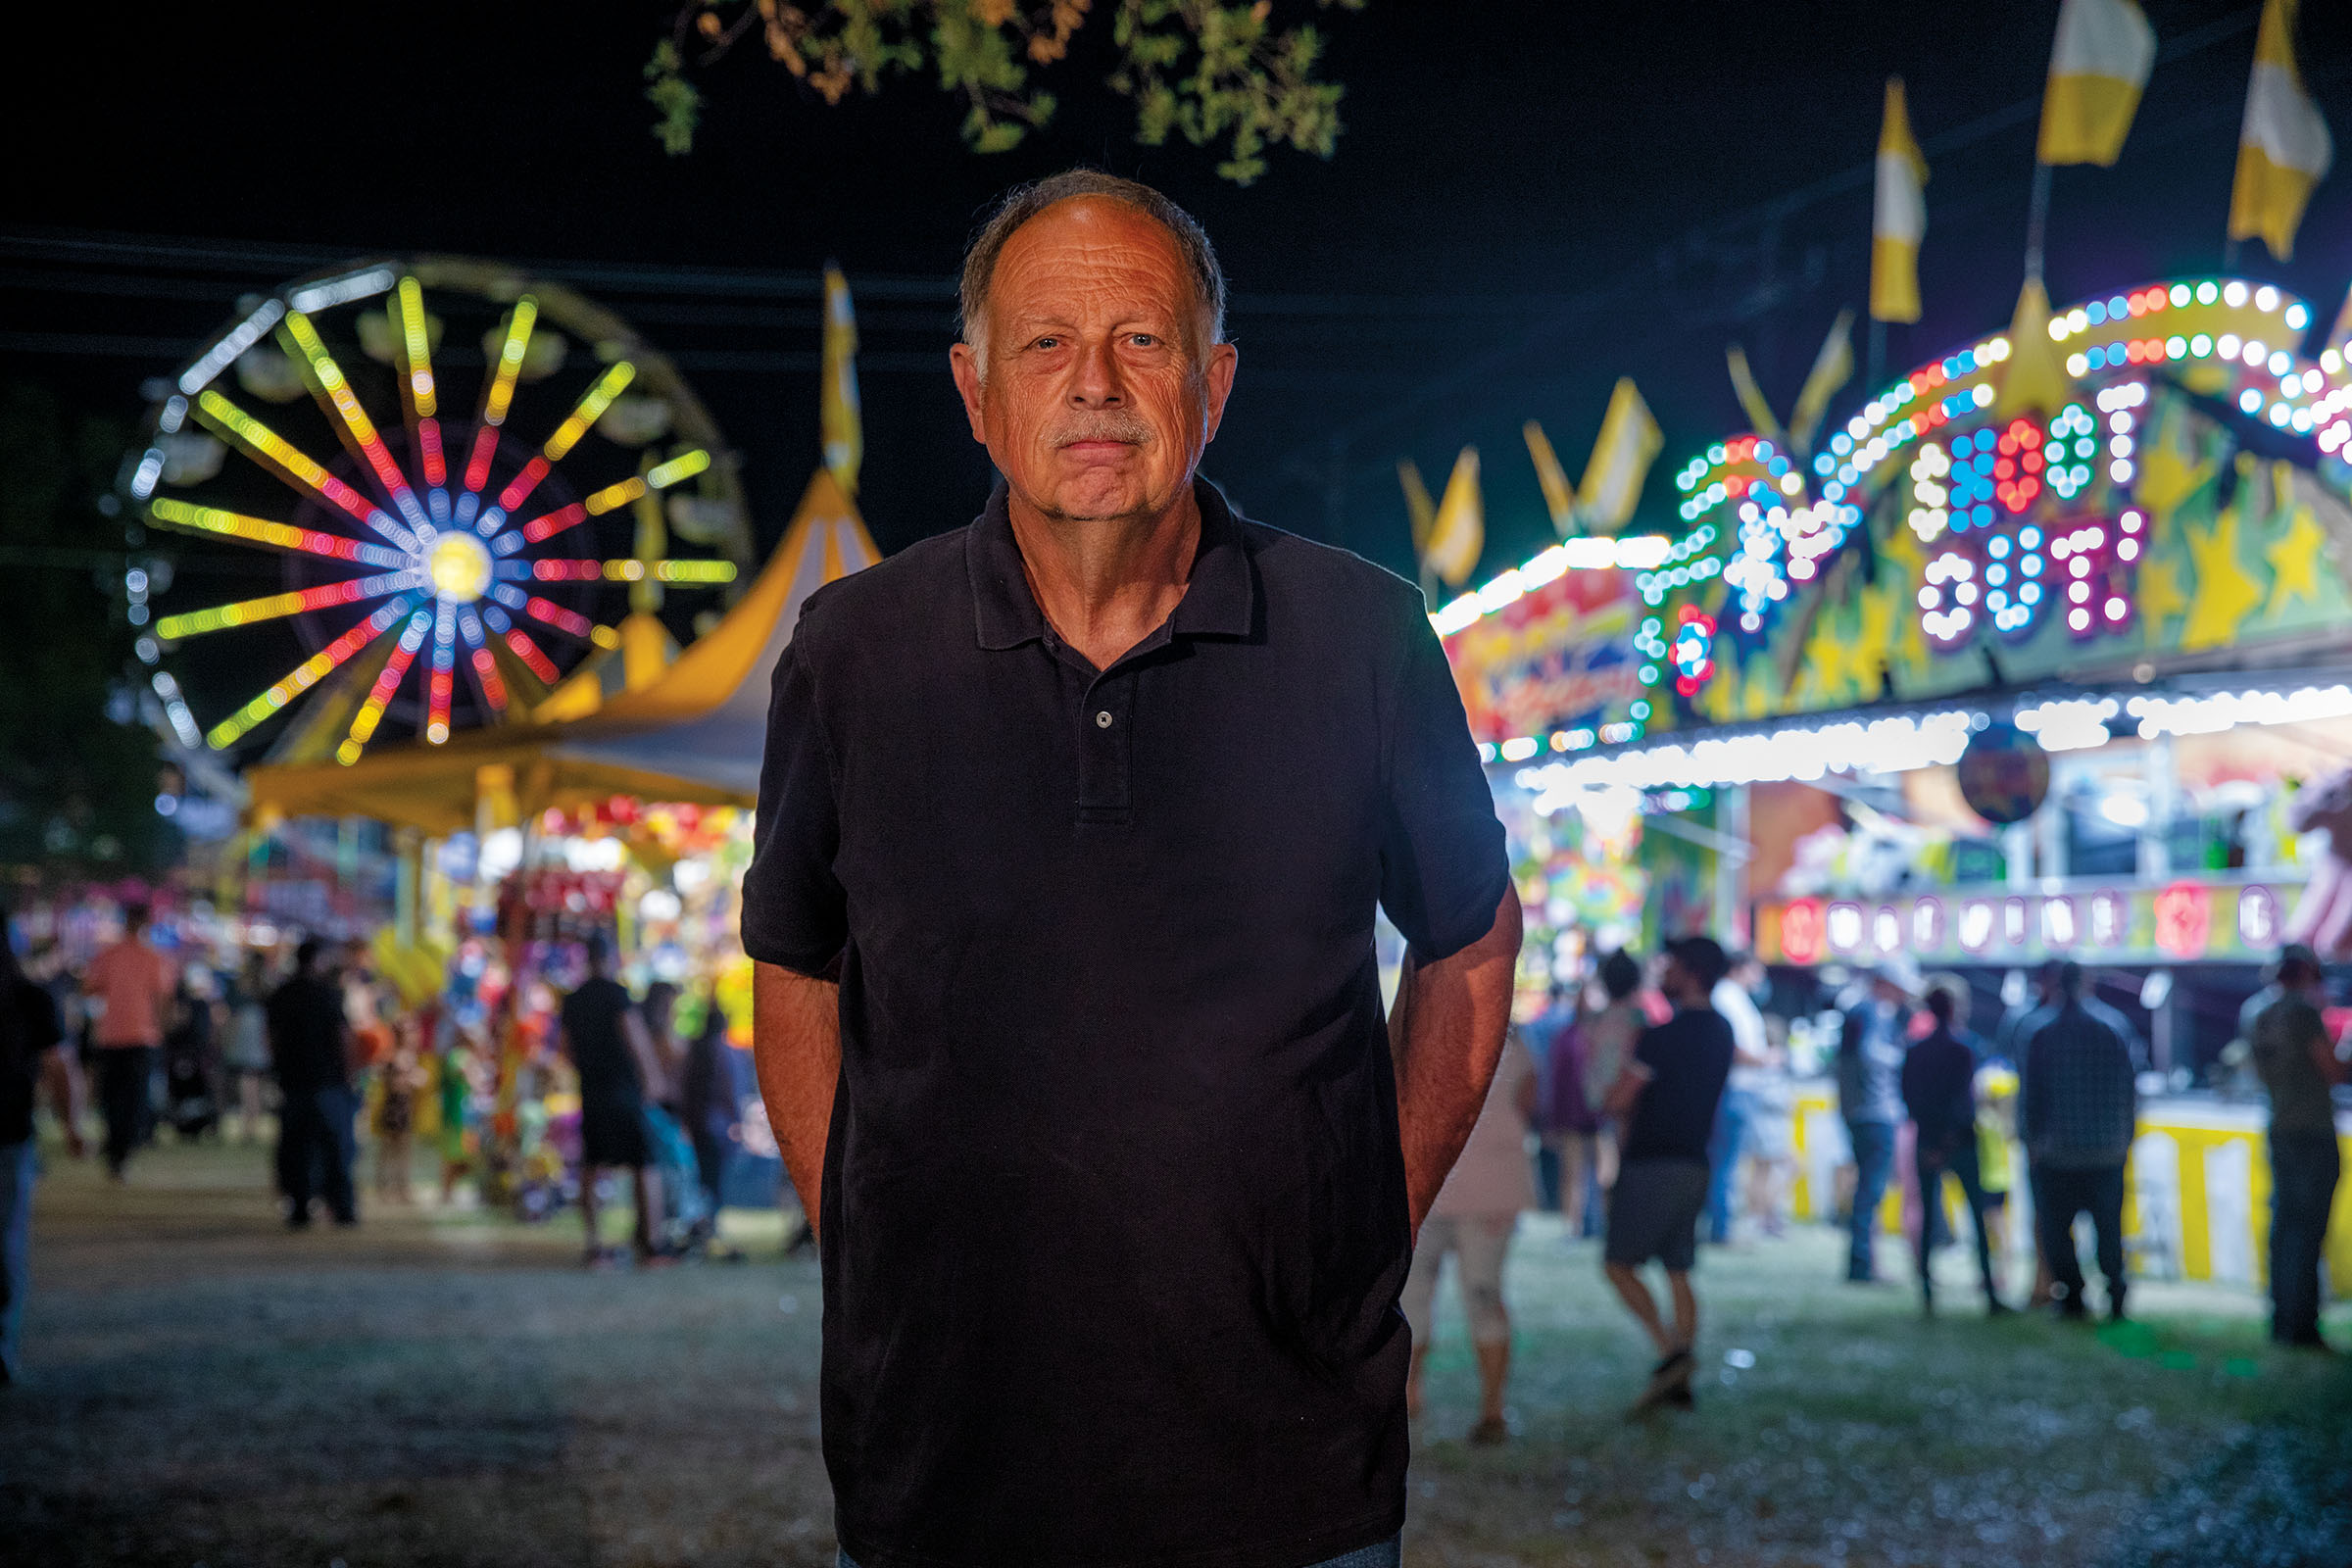 A man in a blue polo shirt stands in front of brightly colored, lit-up carnival rides